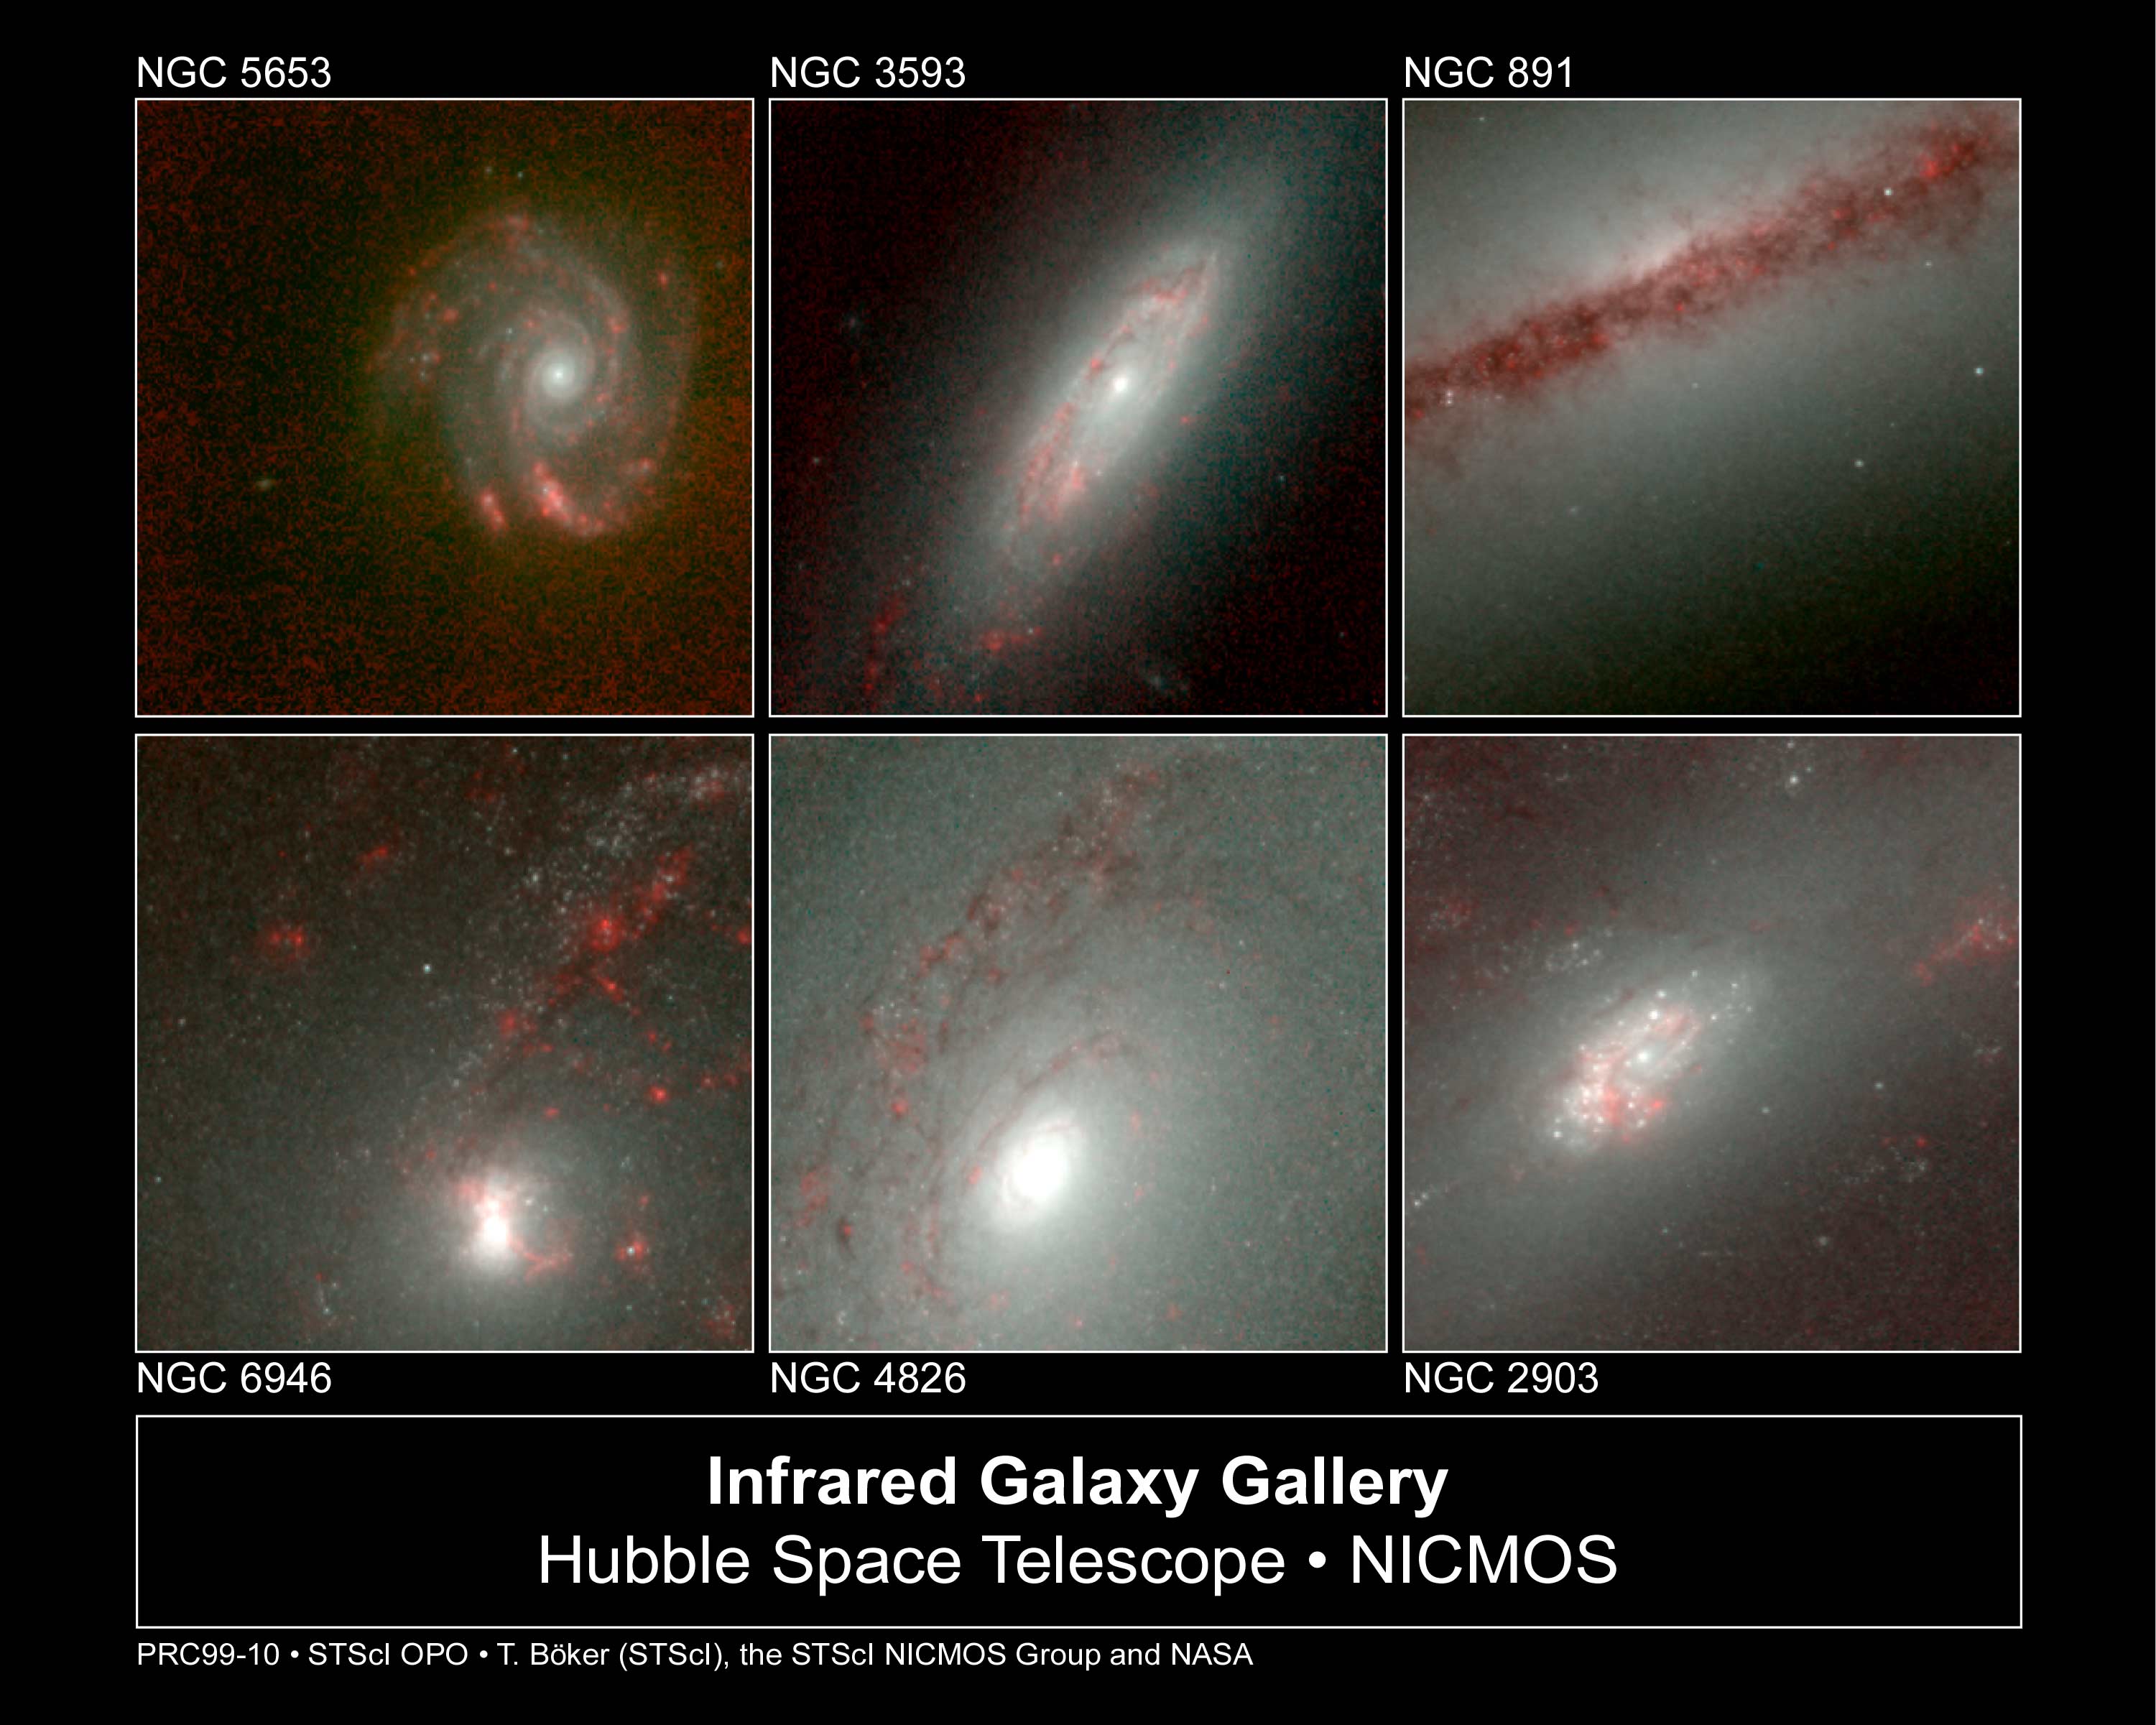 An Infrared Galaxy Gallery